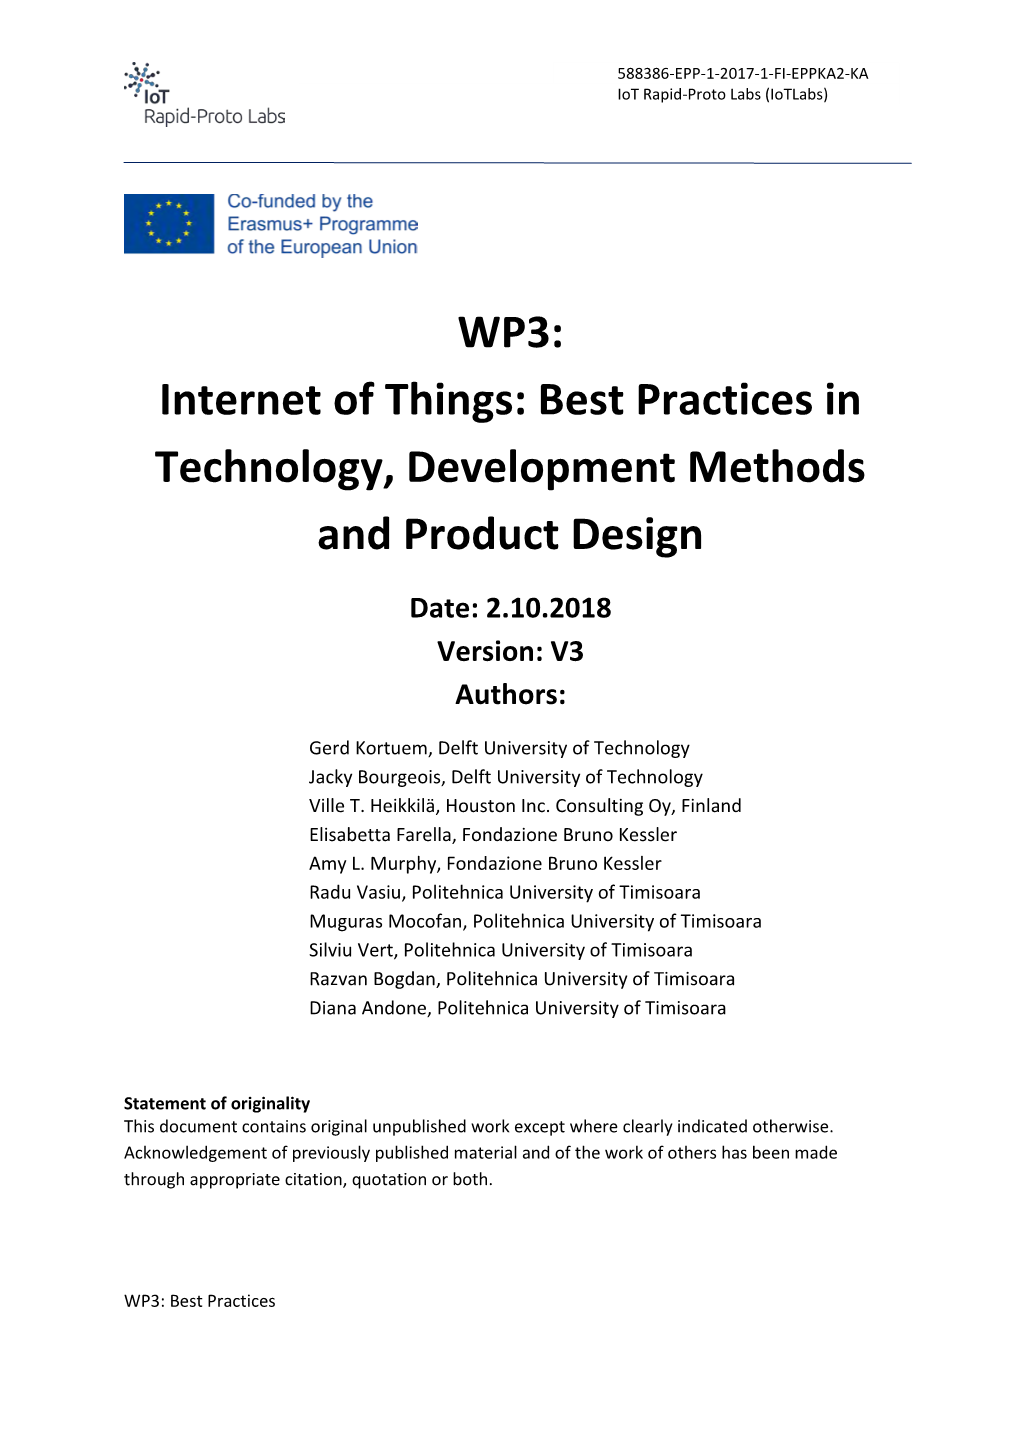 WP3: Internet of Things: Best Practices in Technology, Development Methods and Product Design